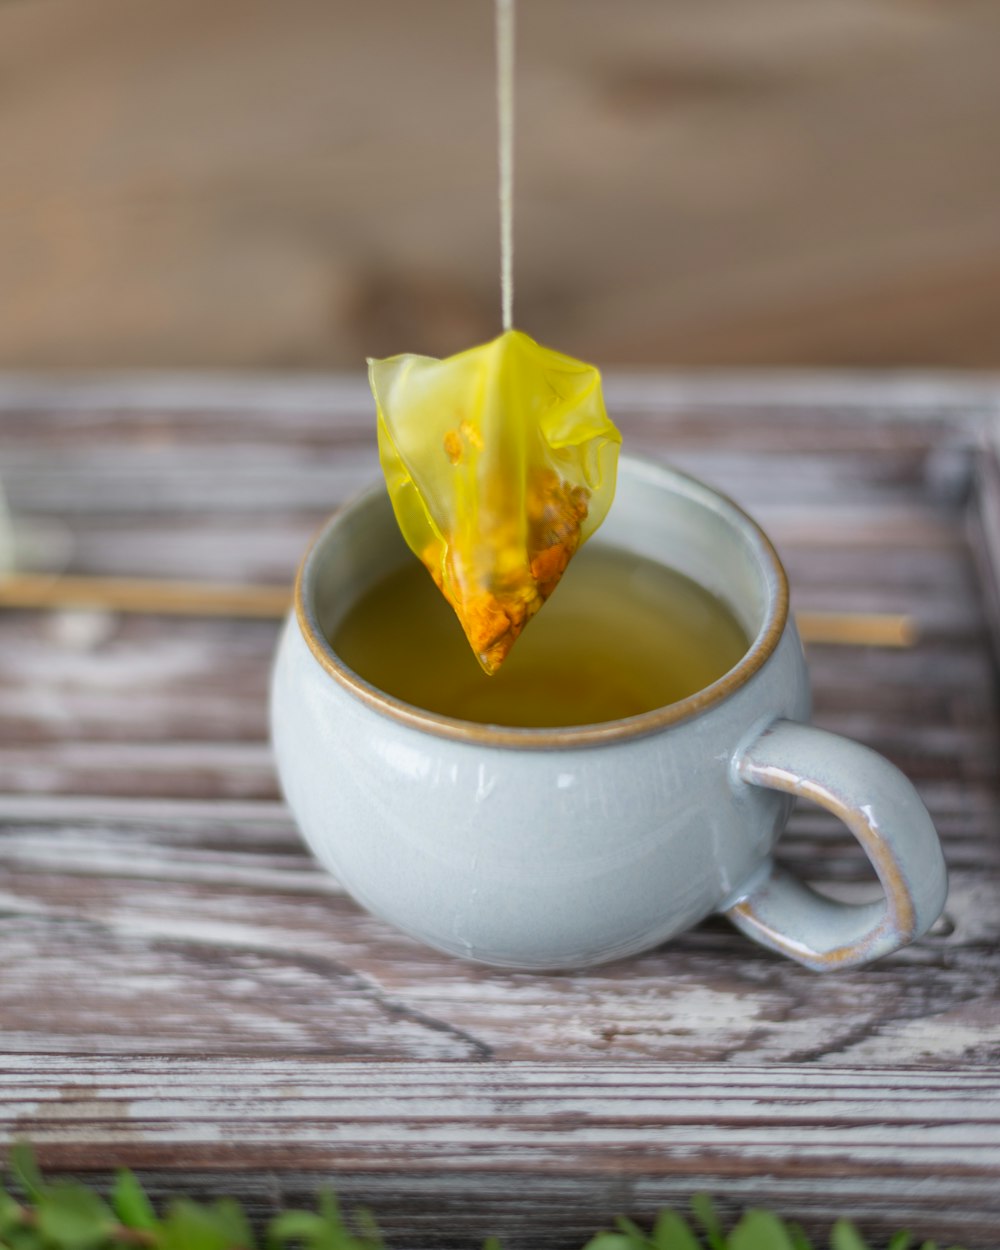 white ceramic teacup with yellow leaf on it